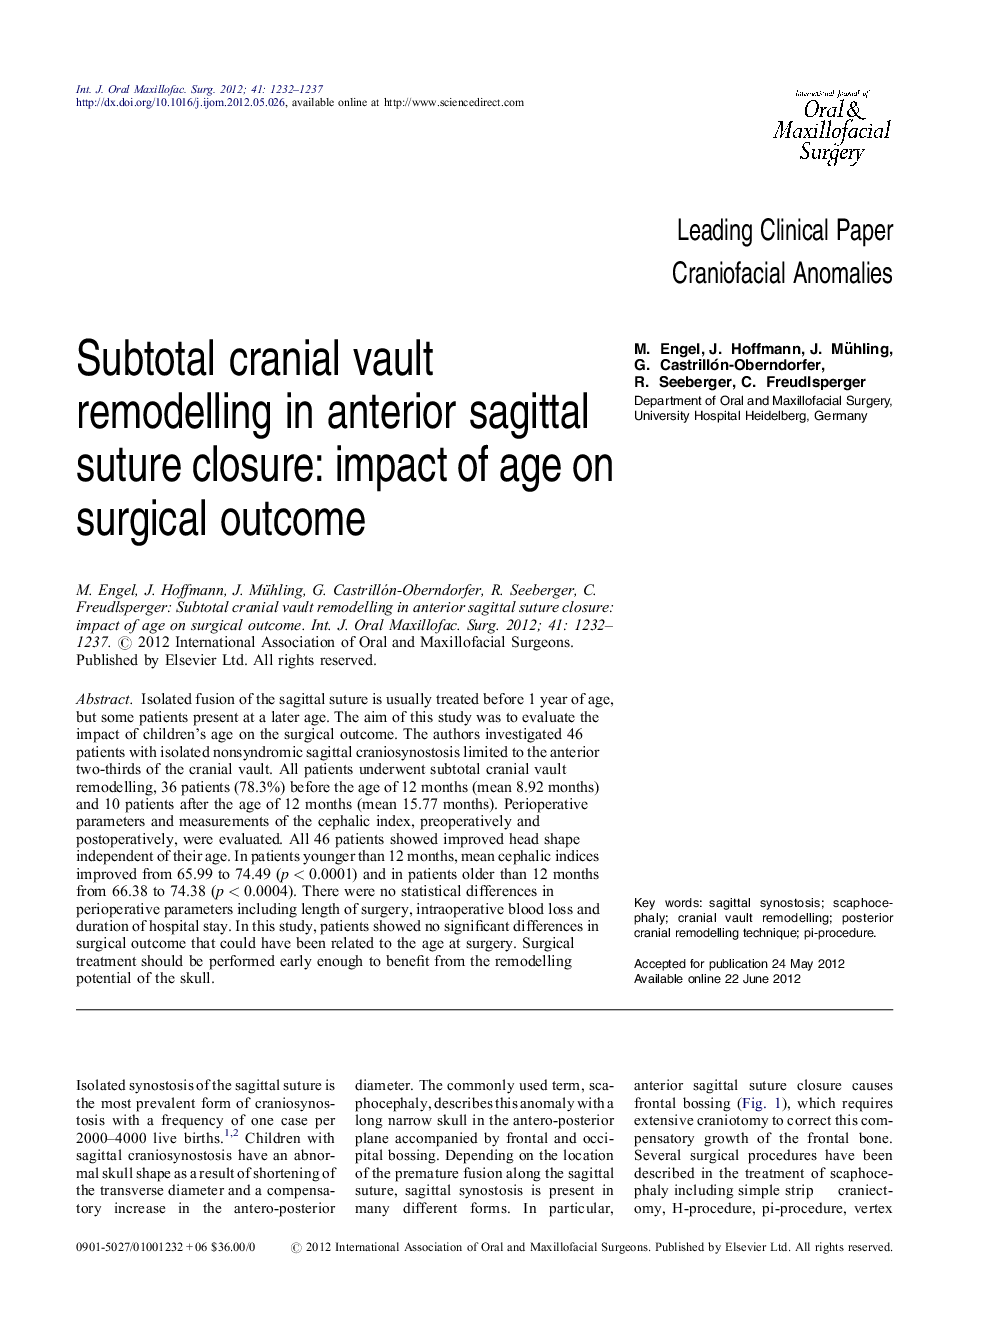 Subtotal cranial vault remodelling in anterior sagittal suture closure: impact of age on surgical outcome